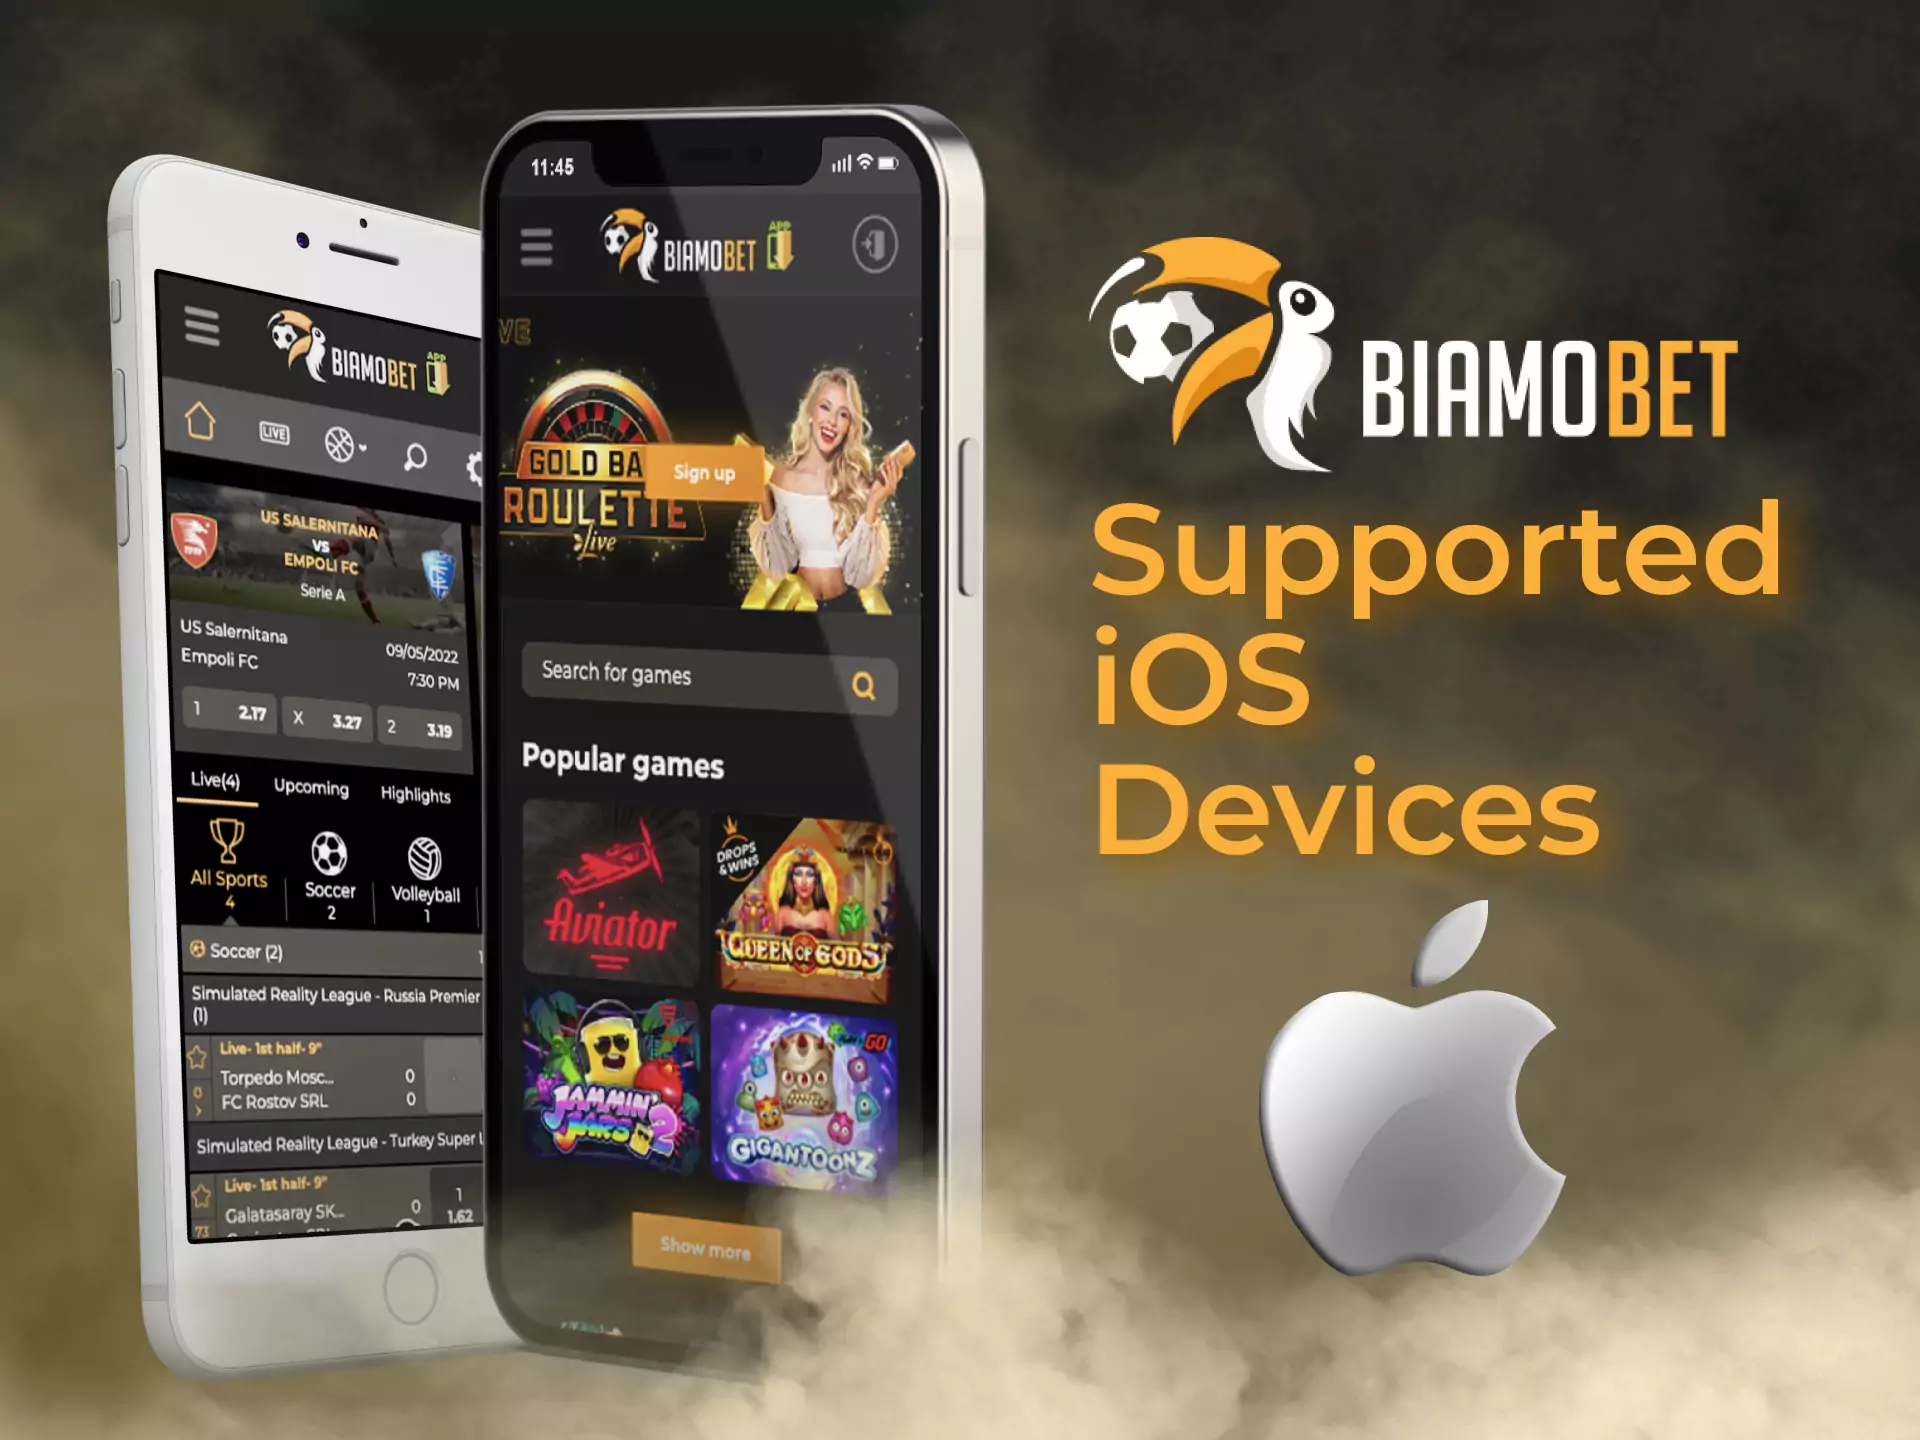 Biamobet works on devices based on iOS.